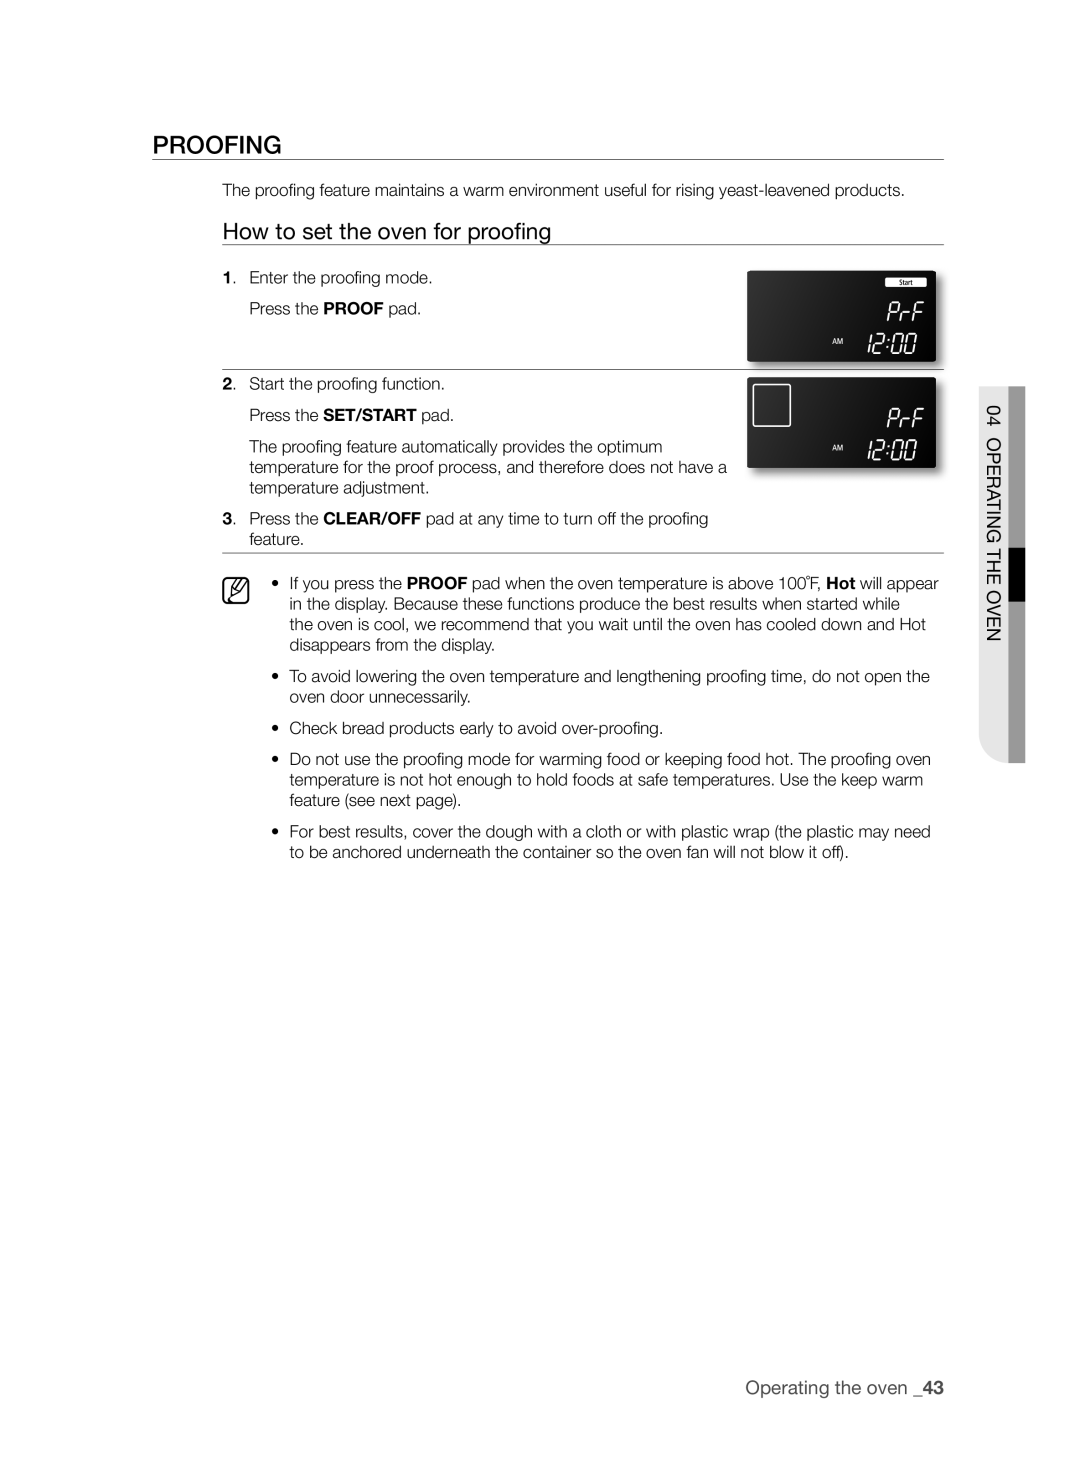 Samsung FTQ307NWGX user manual Proofing, How to set the oven for proofing, Operating The Oven, Operating the oven 